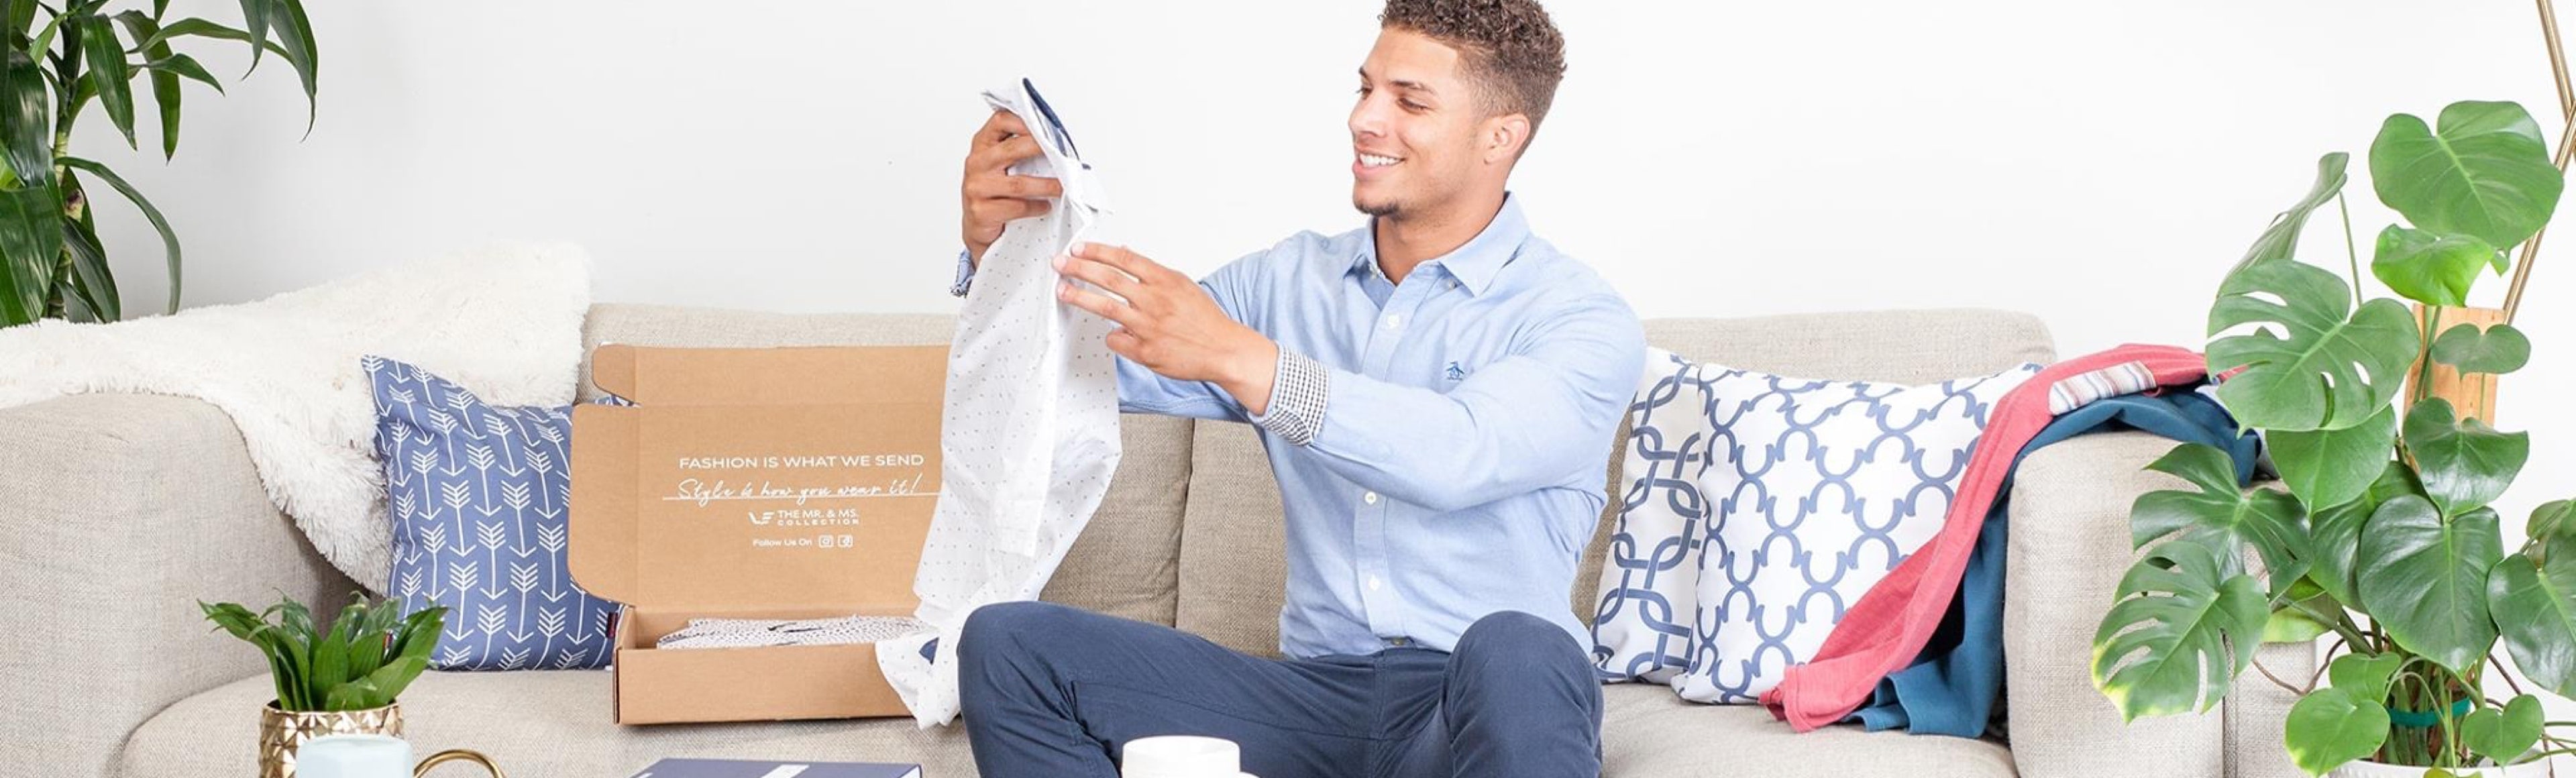 man opening a subscription box with clothes